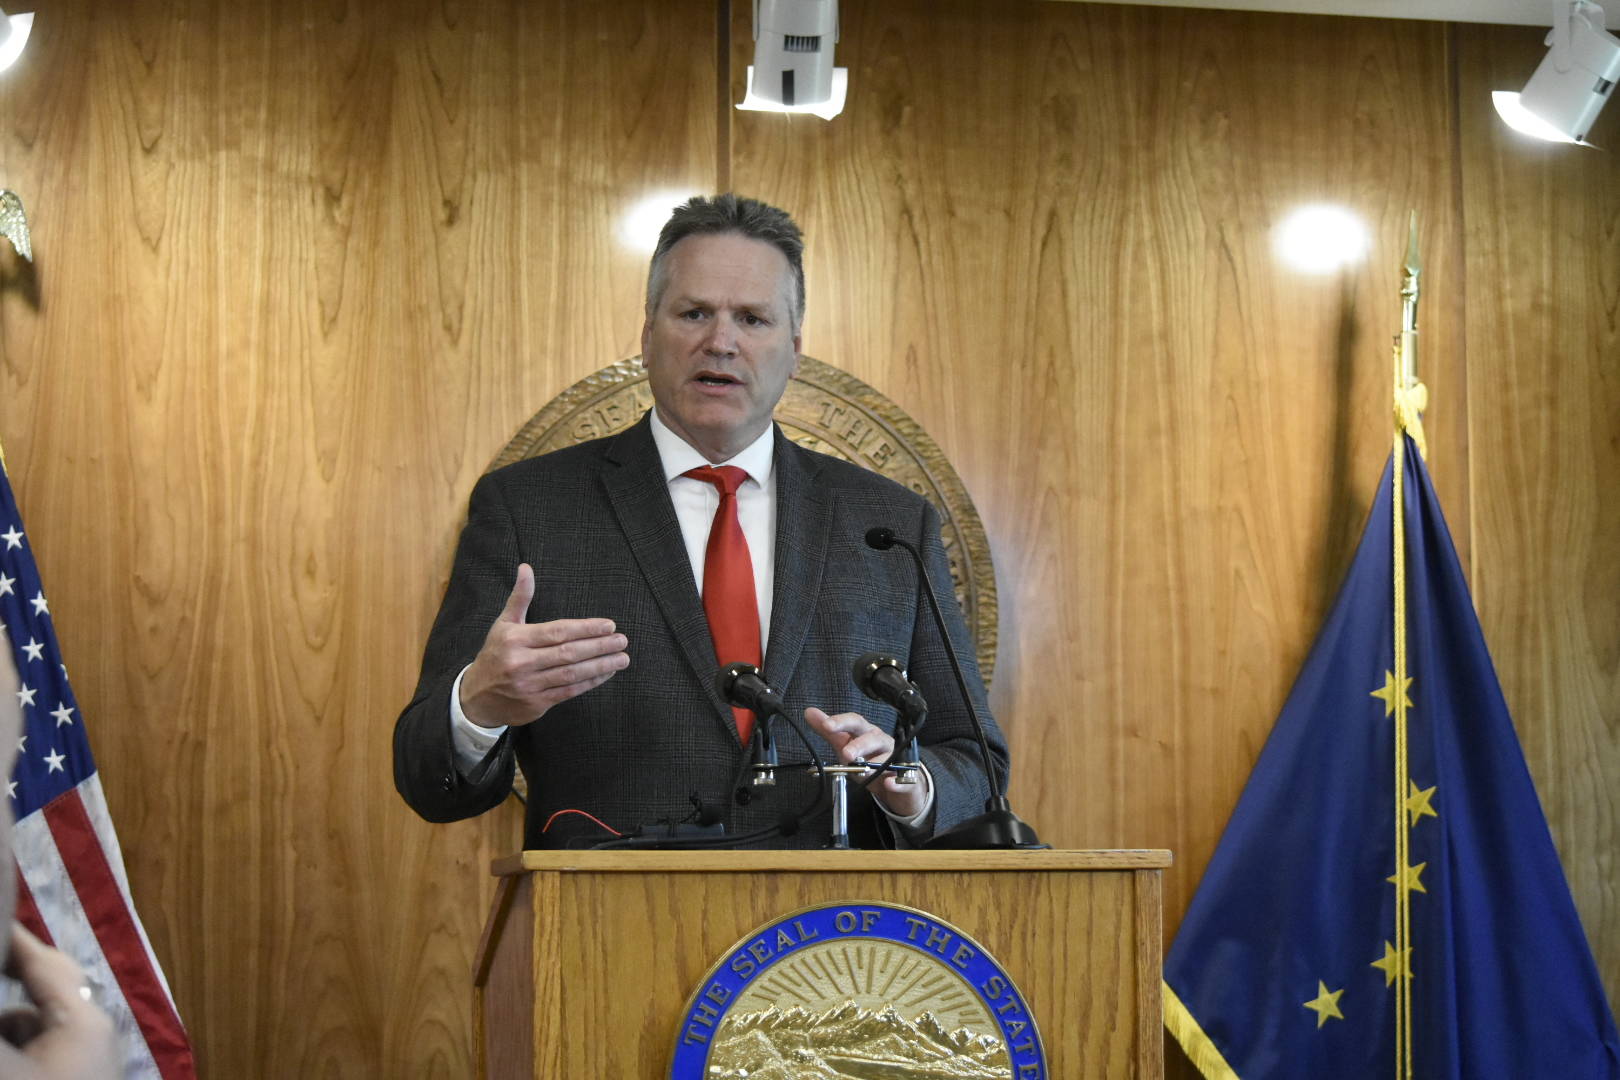 Gov. Mike Dunleavy held a press conference at the Alaska State Capitol on Thursday, June 17, 2021, to say he was ready to call lawmakers into yet another special session if they didn't rectify issues with the budget passed earlier this week by Friday. (Peter Segall / Juneau Empire)